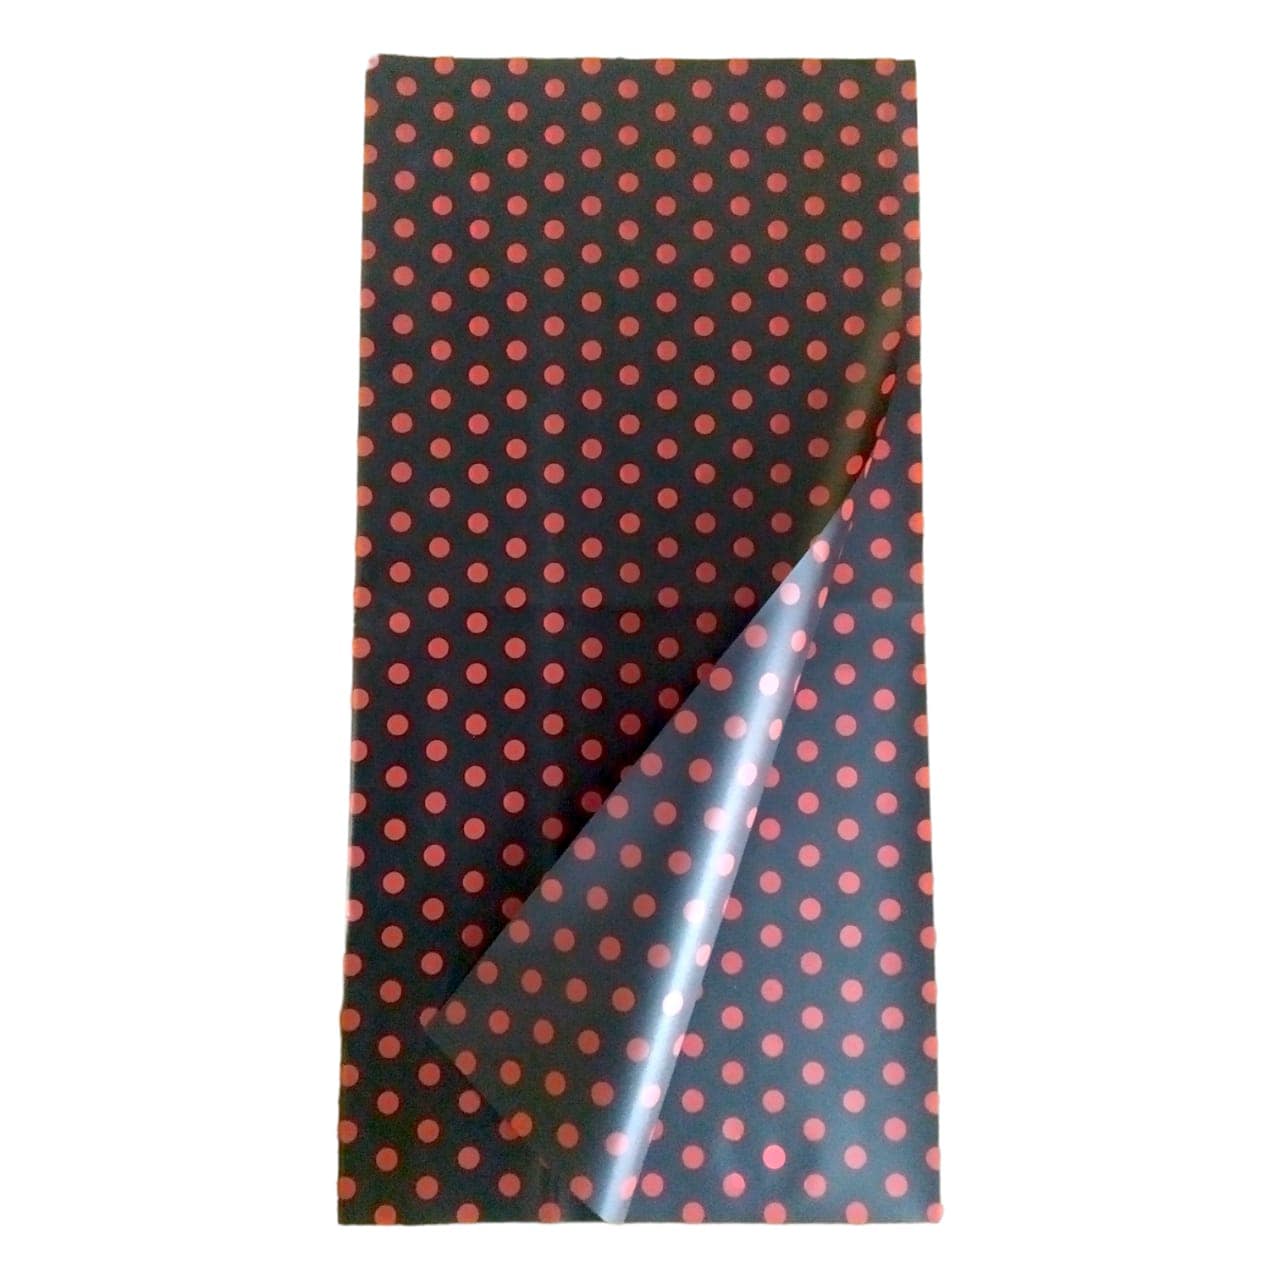 Ravrai Craft - Mumbai Branch Wrapping Paper BLACK Polka Dots Wrapping Paper - Plastic Material, 58x58cm, Pack of 1 Sheet